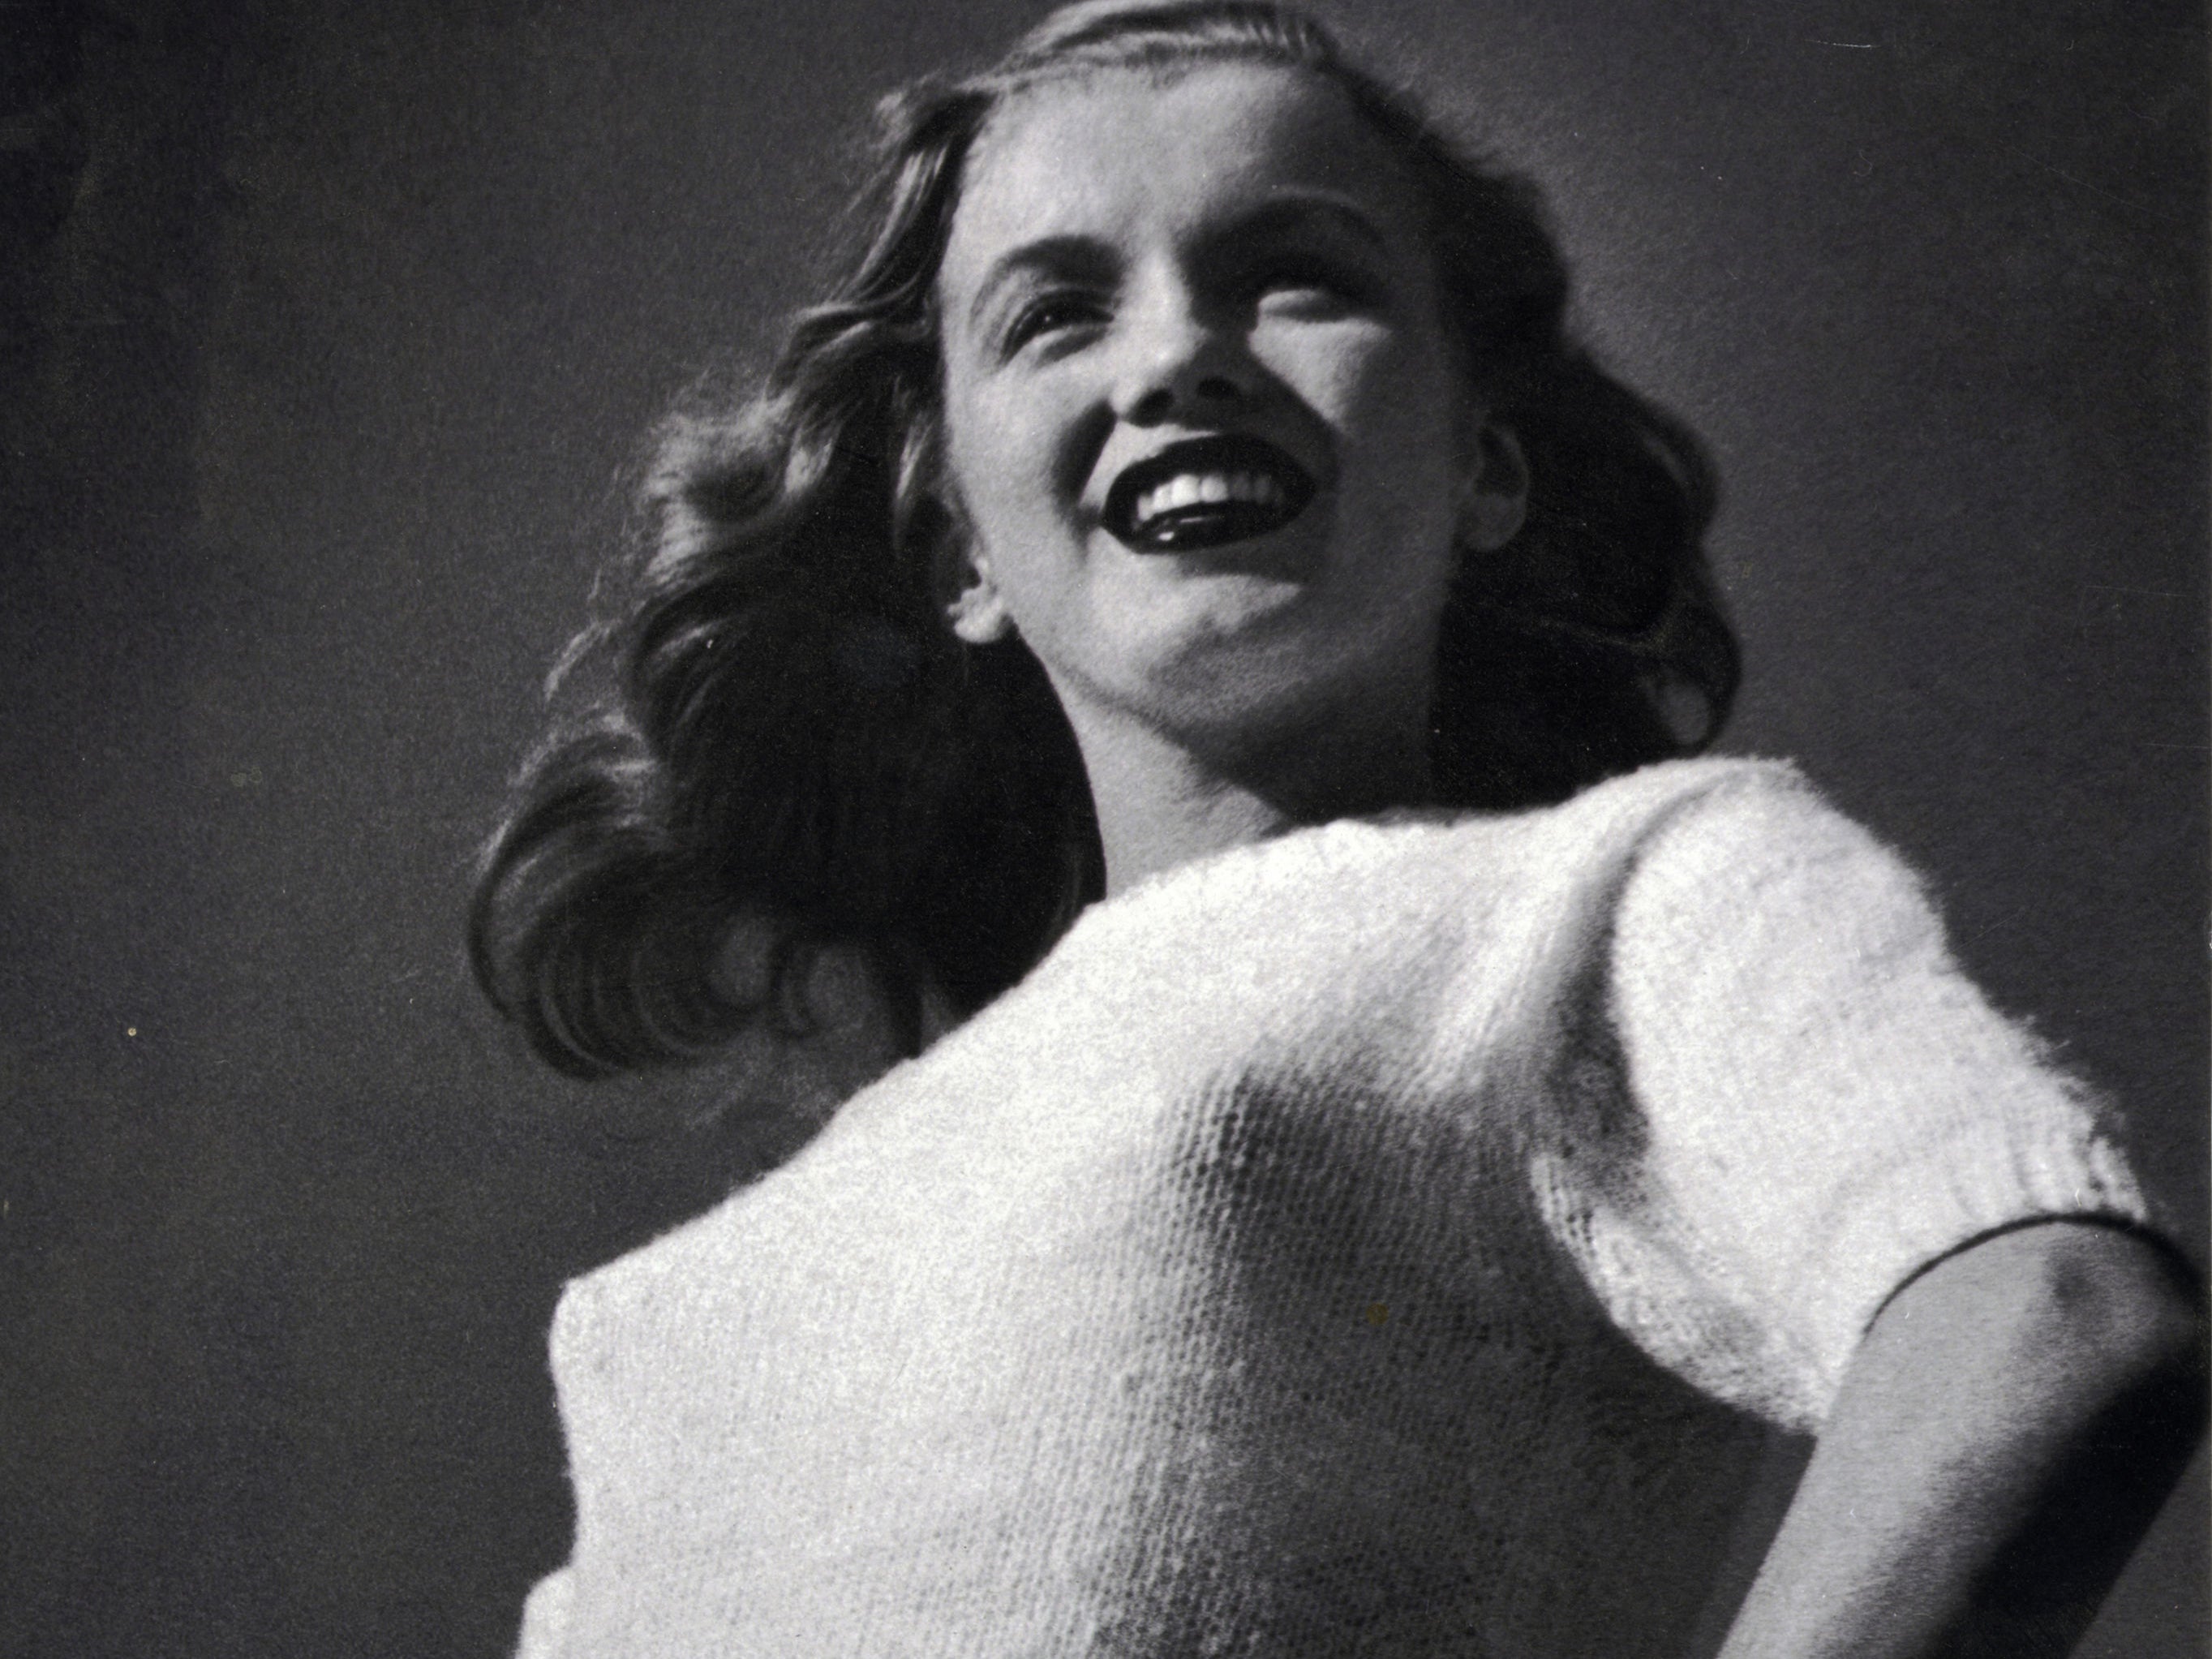 The image of 20-year-old Monroe during a professional photoshoot before she became a Hollywood icon, which has gone under the hammer